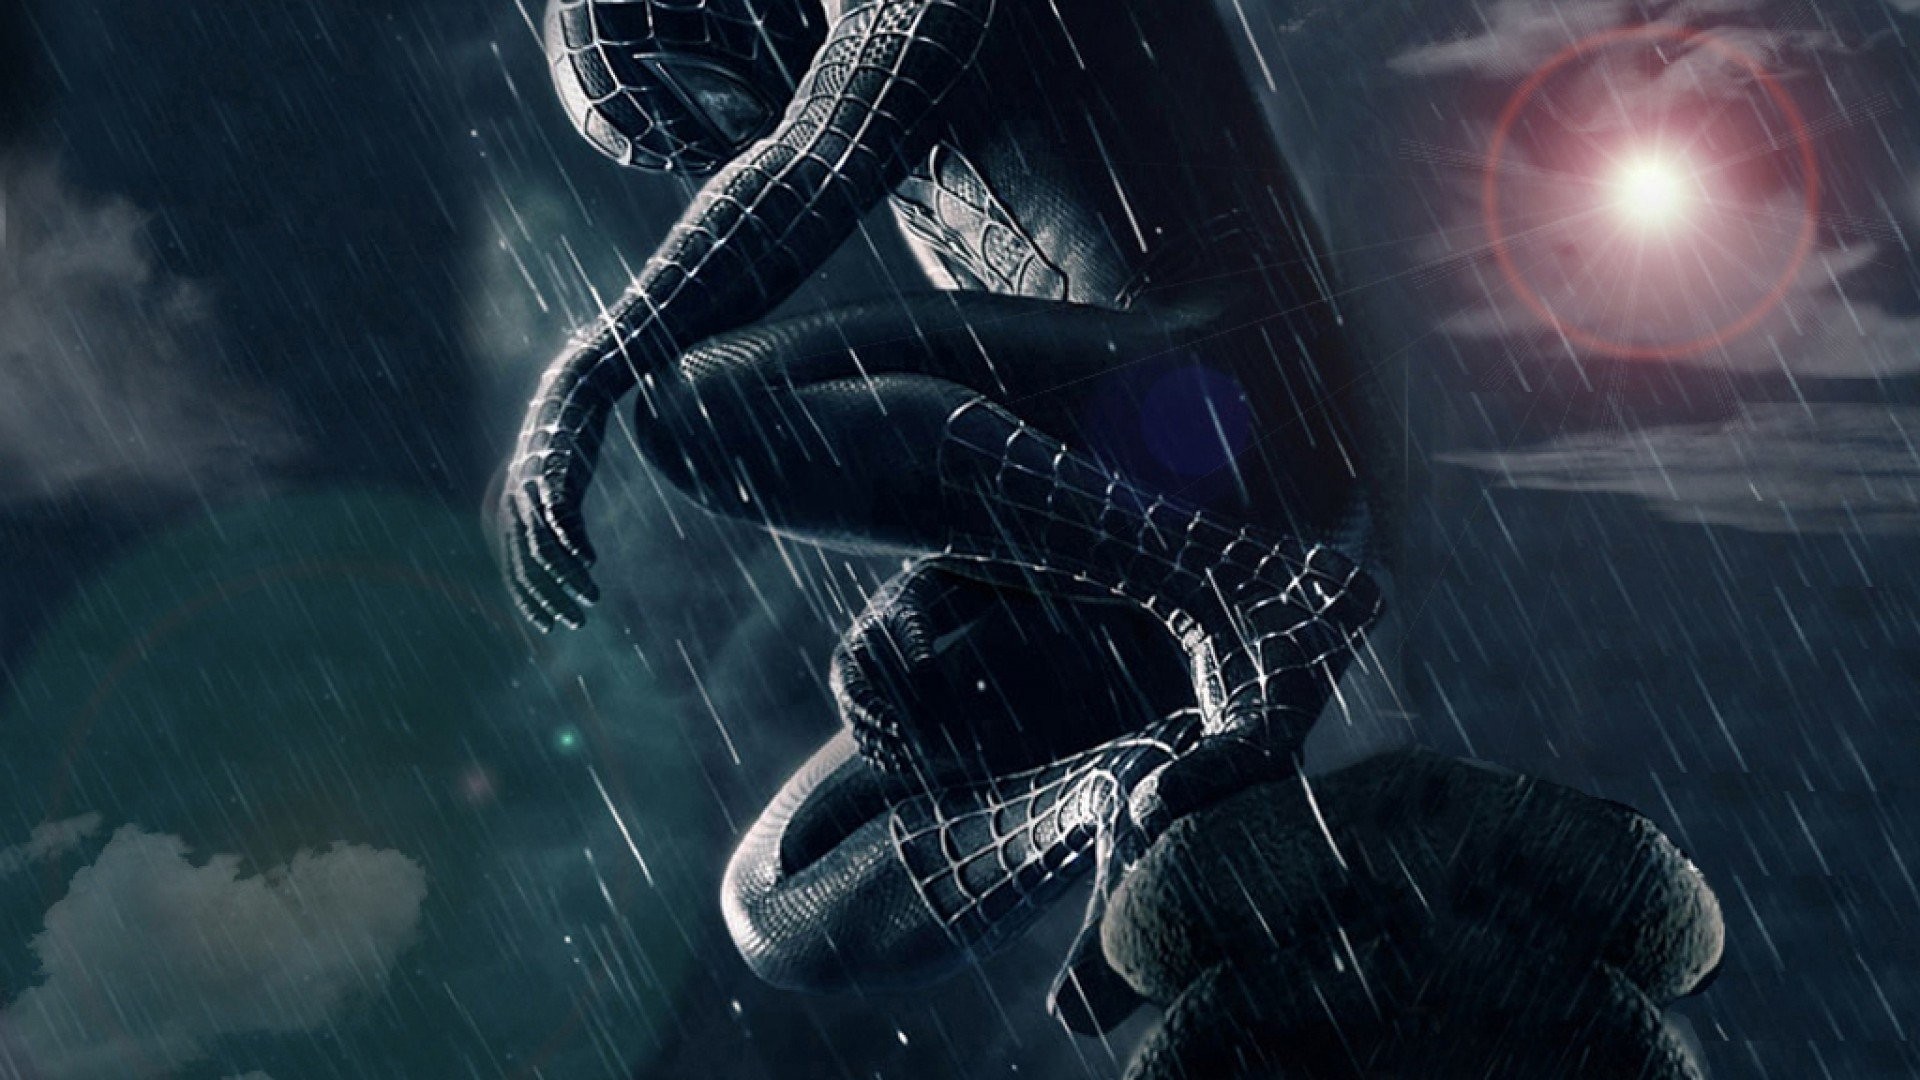 Spiderman wallpaper HD ·① Download free HD wallpapers for ...